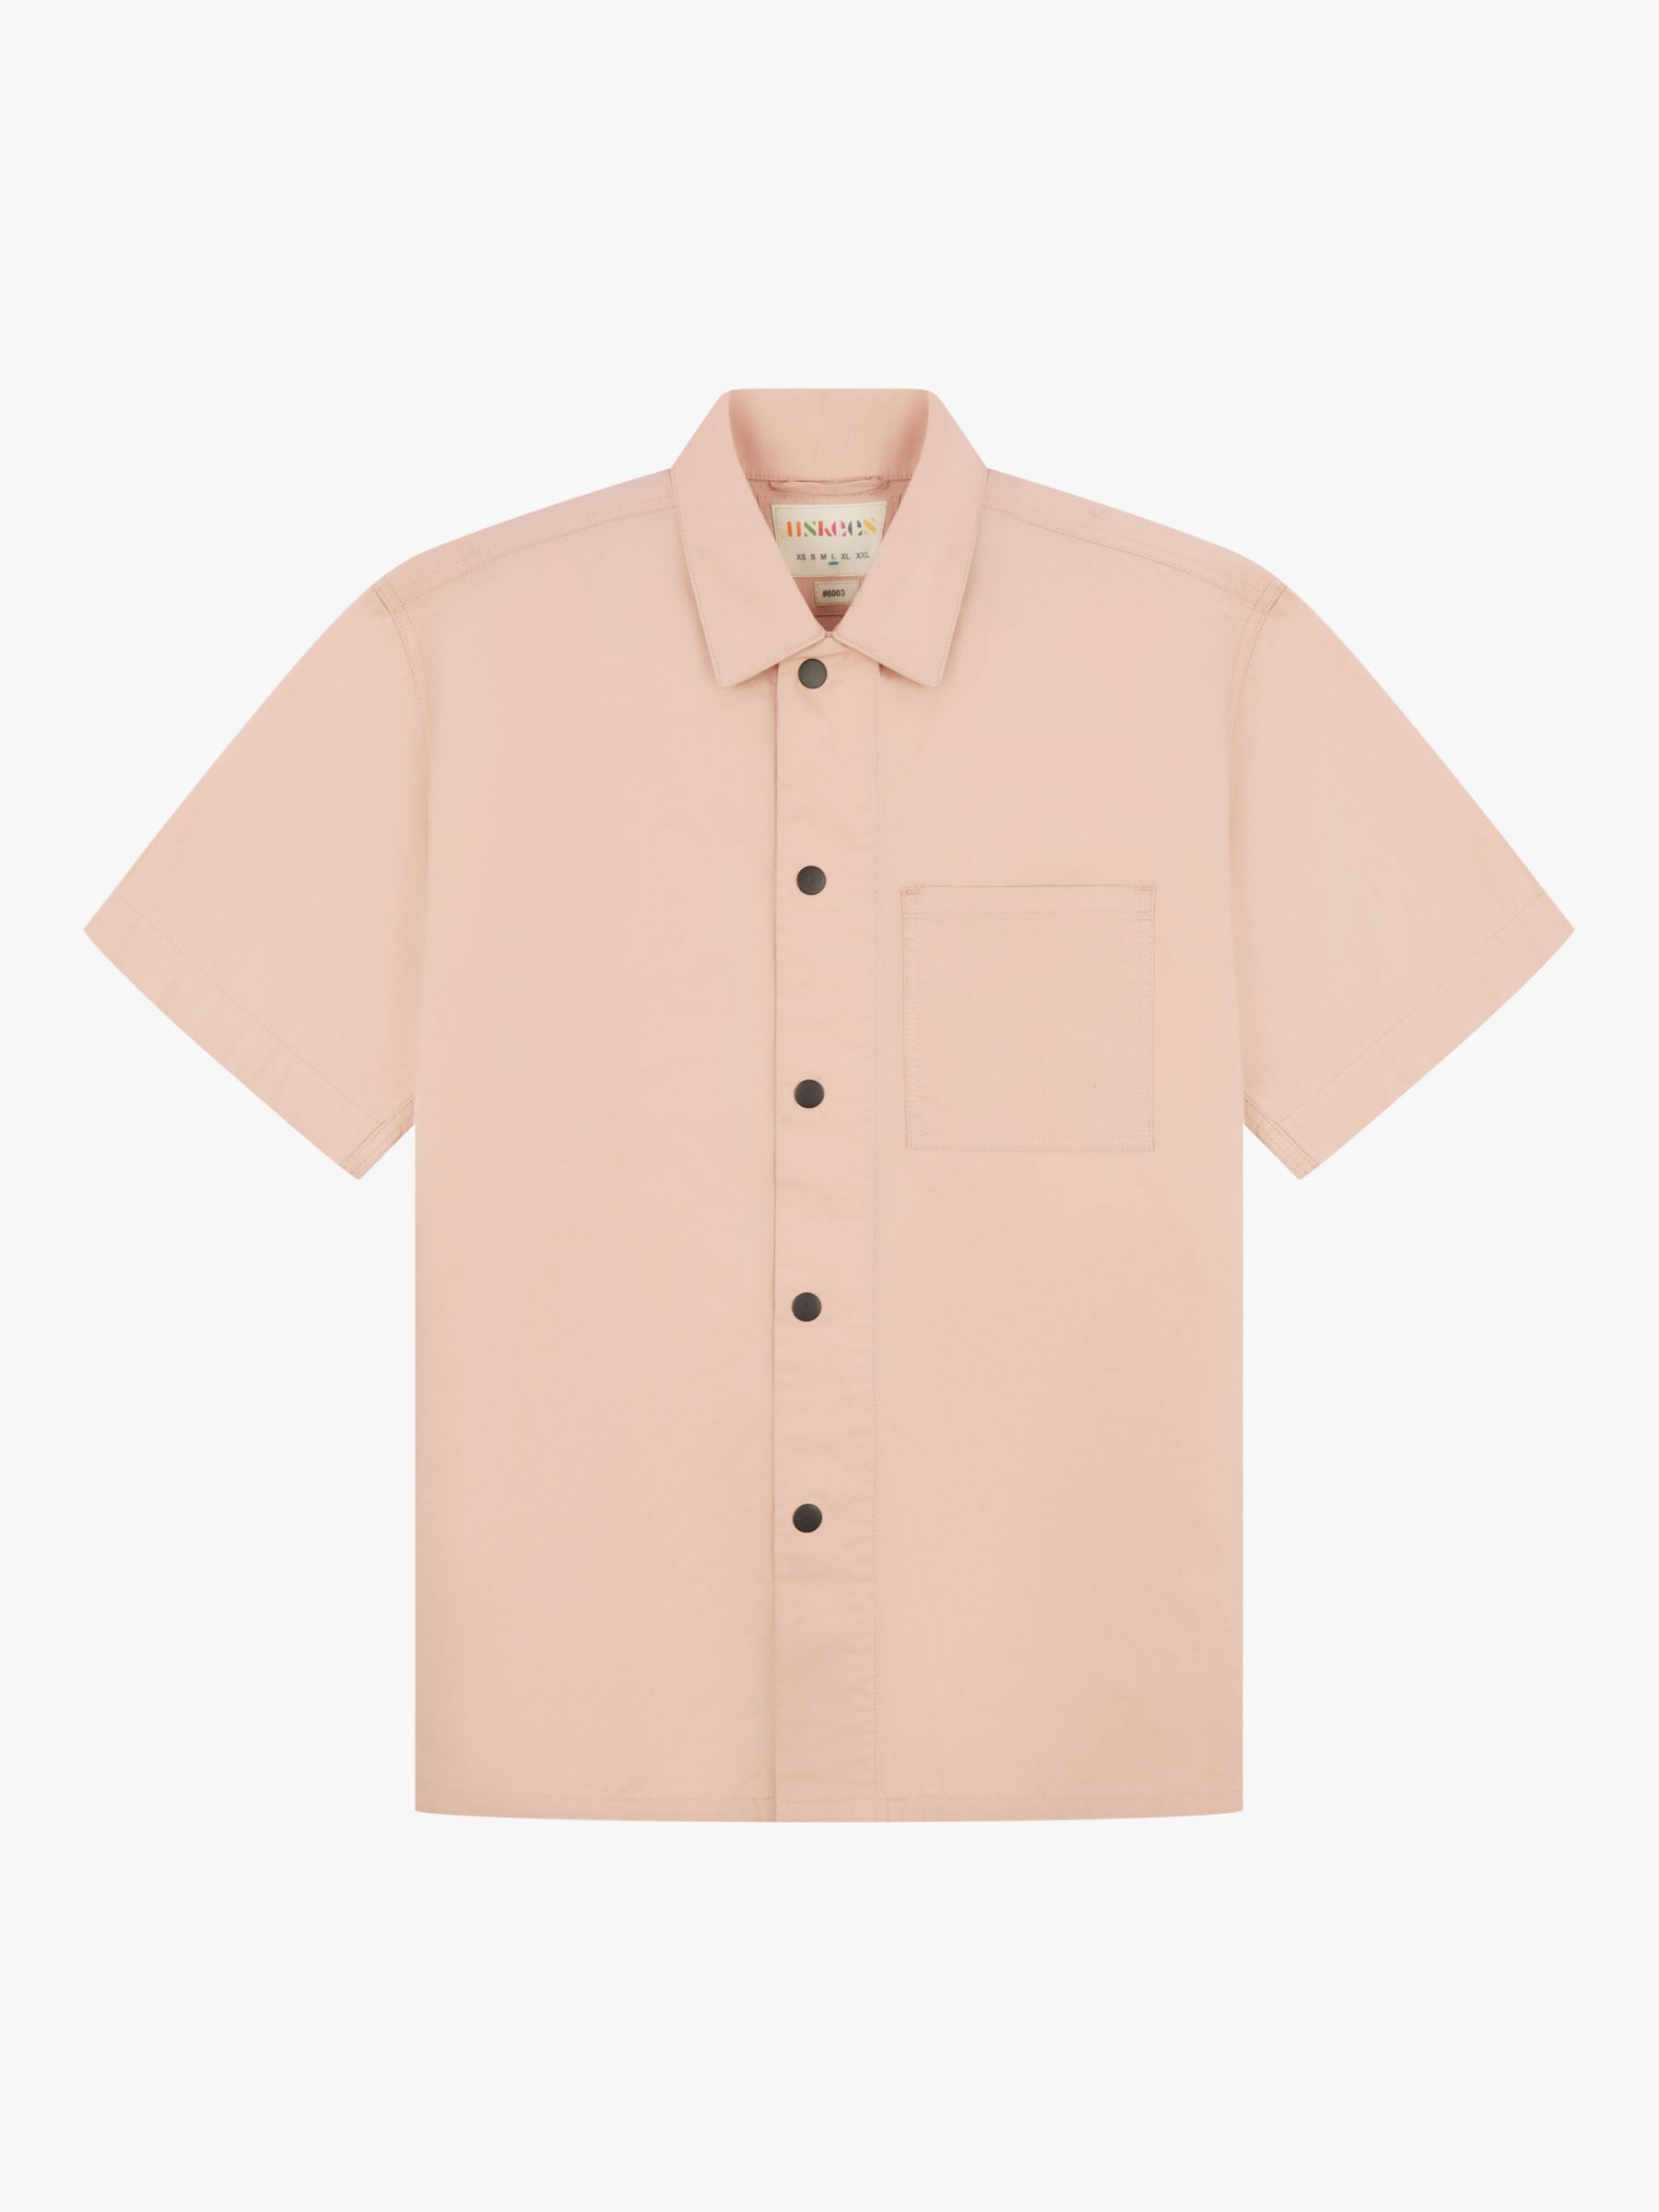 Uskees Short Sleeve Cotton Shirt, Dusty Pink, M